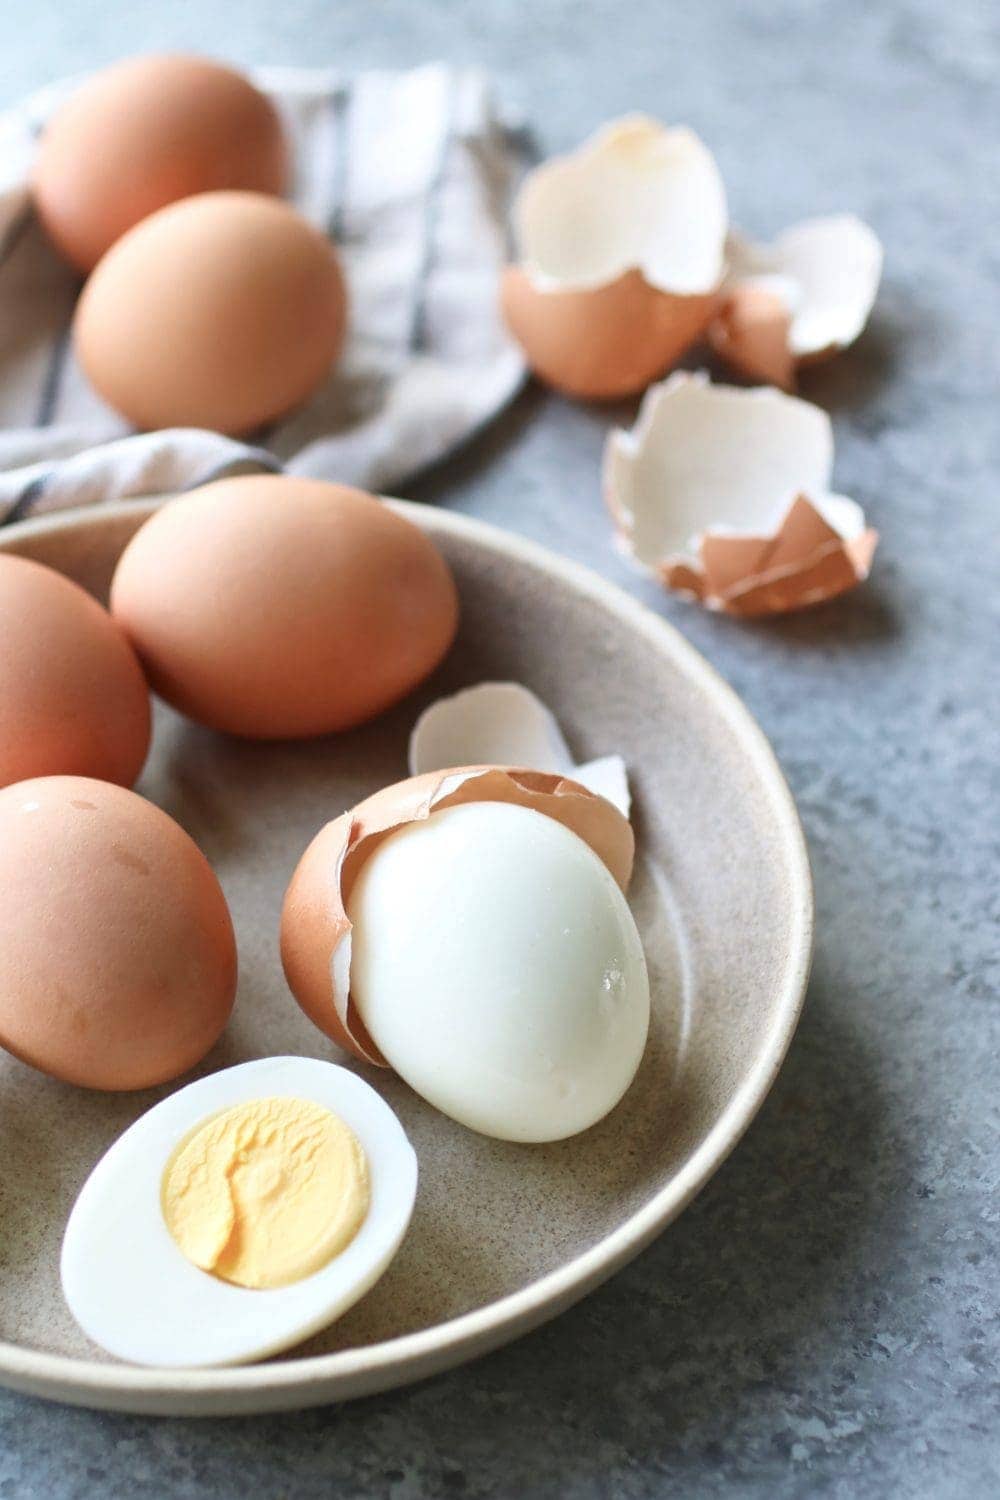 How to Make Easy Peel Hard Boiled Eggs - The Real Food Dietitians